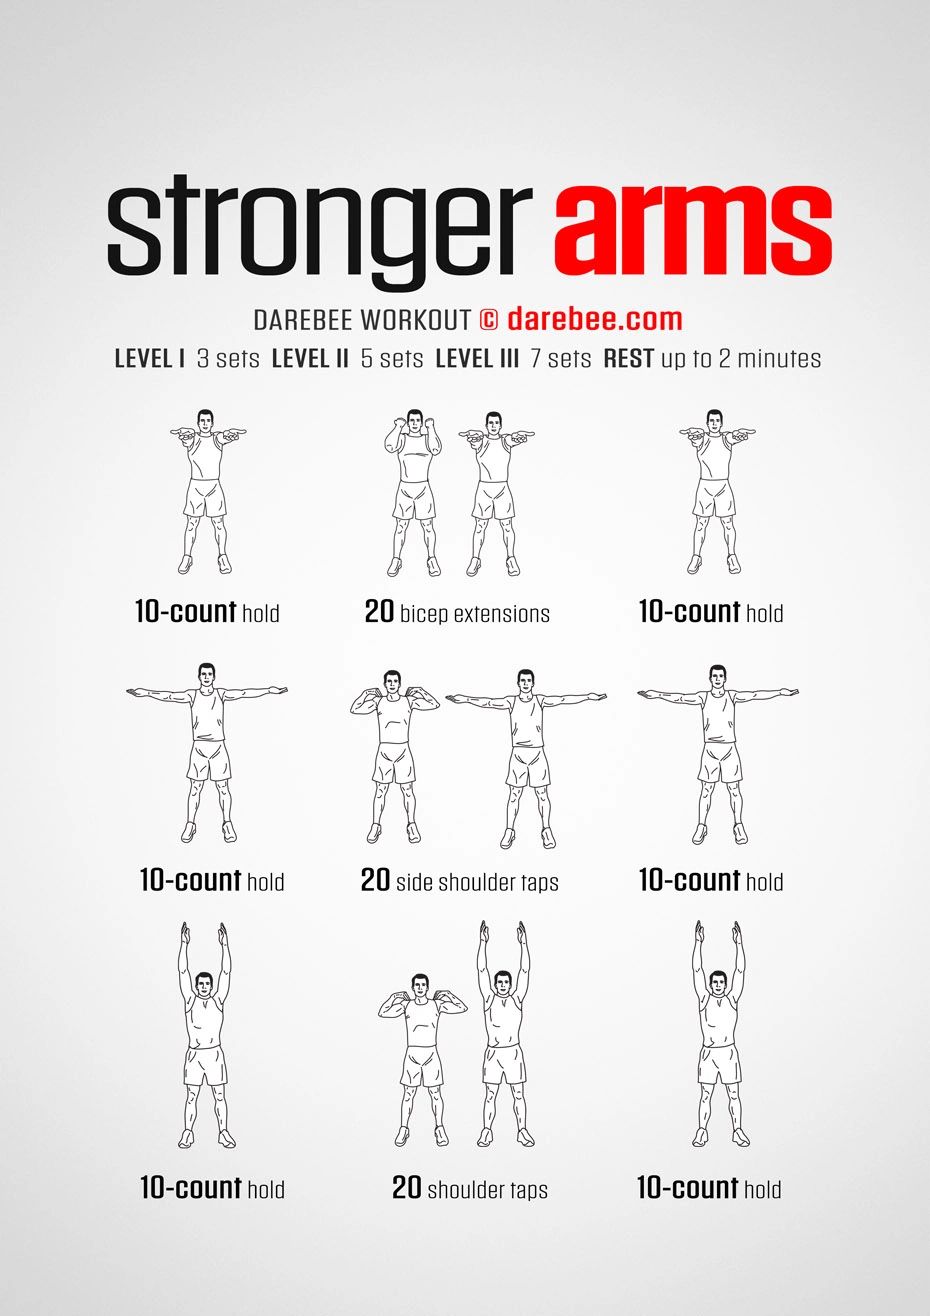 Strong arms in 40 minutes. - Exercises, workouts and routines